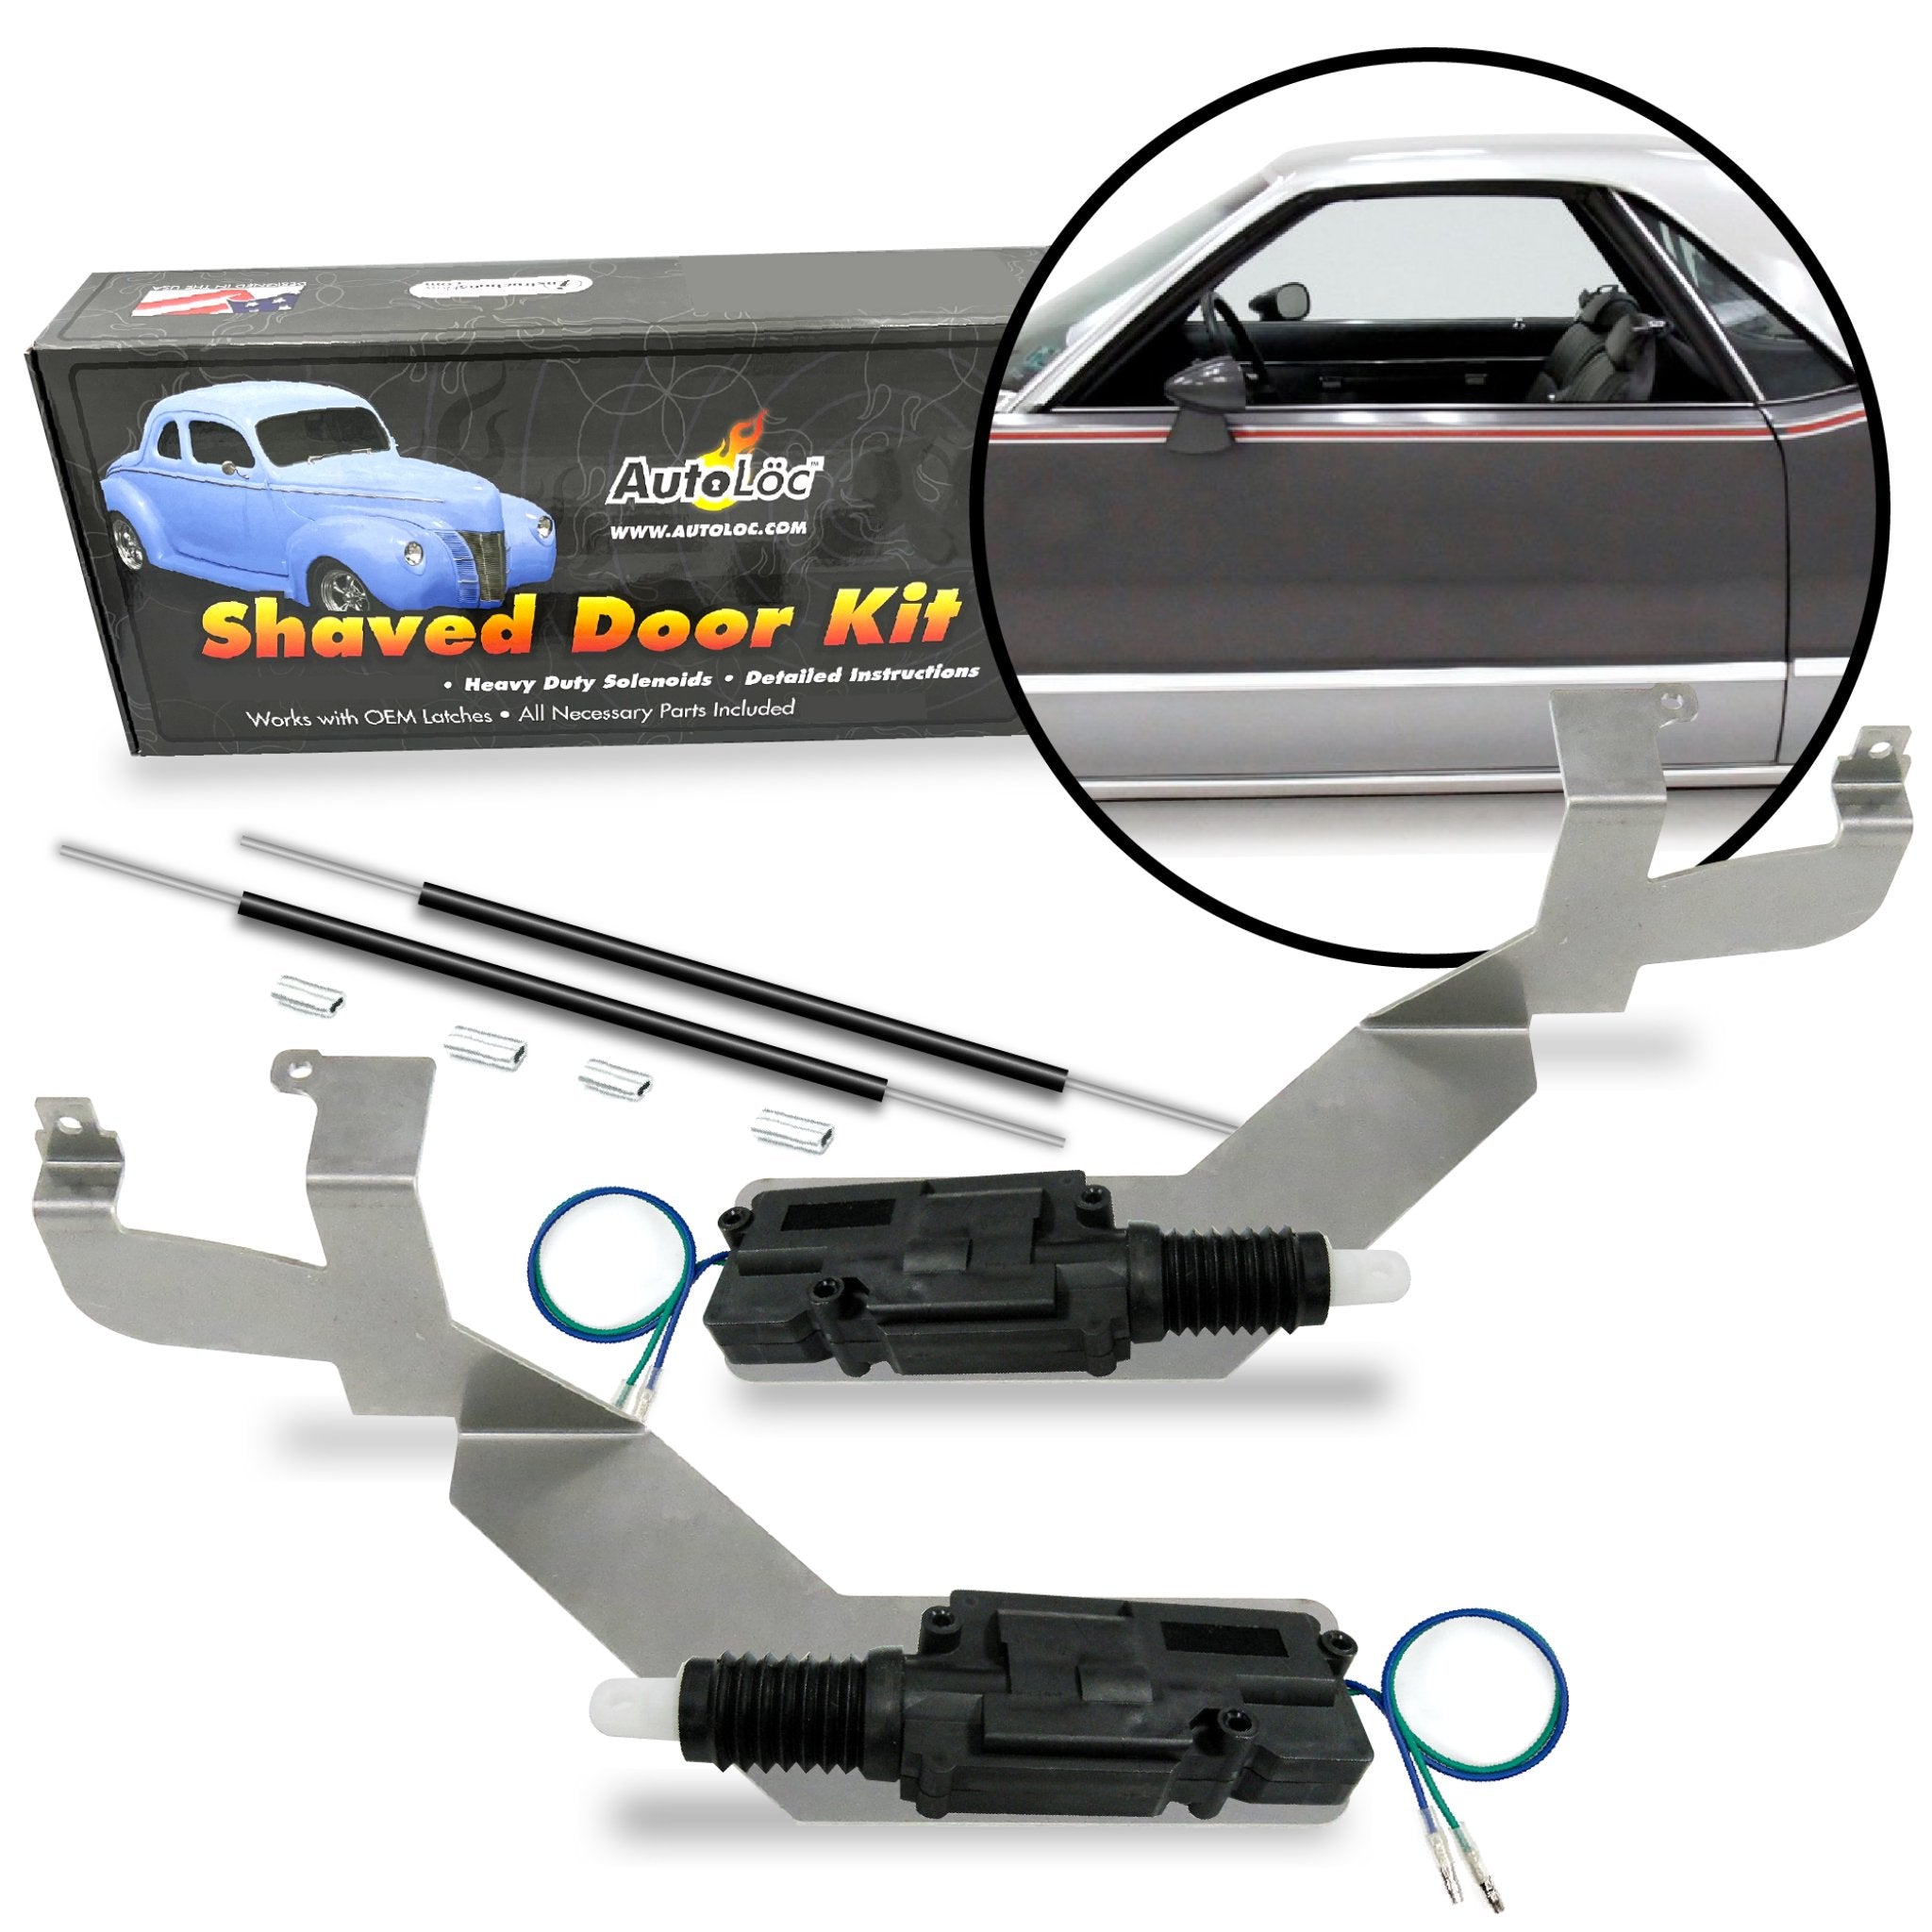 Bolt-On Shave Door Kit for Most 1978 - 2000 GM Cars and Trucks Easy Installation